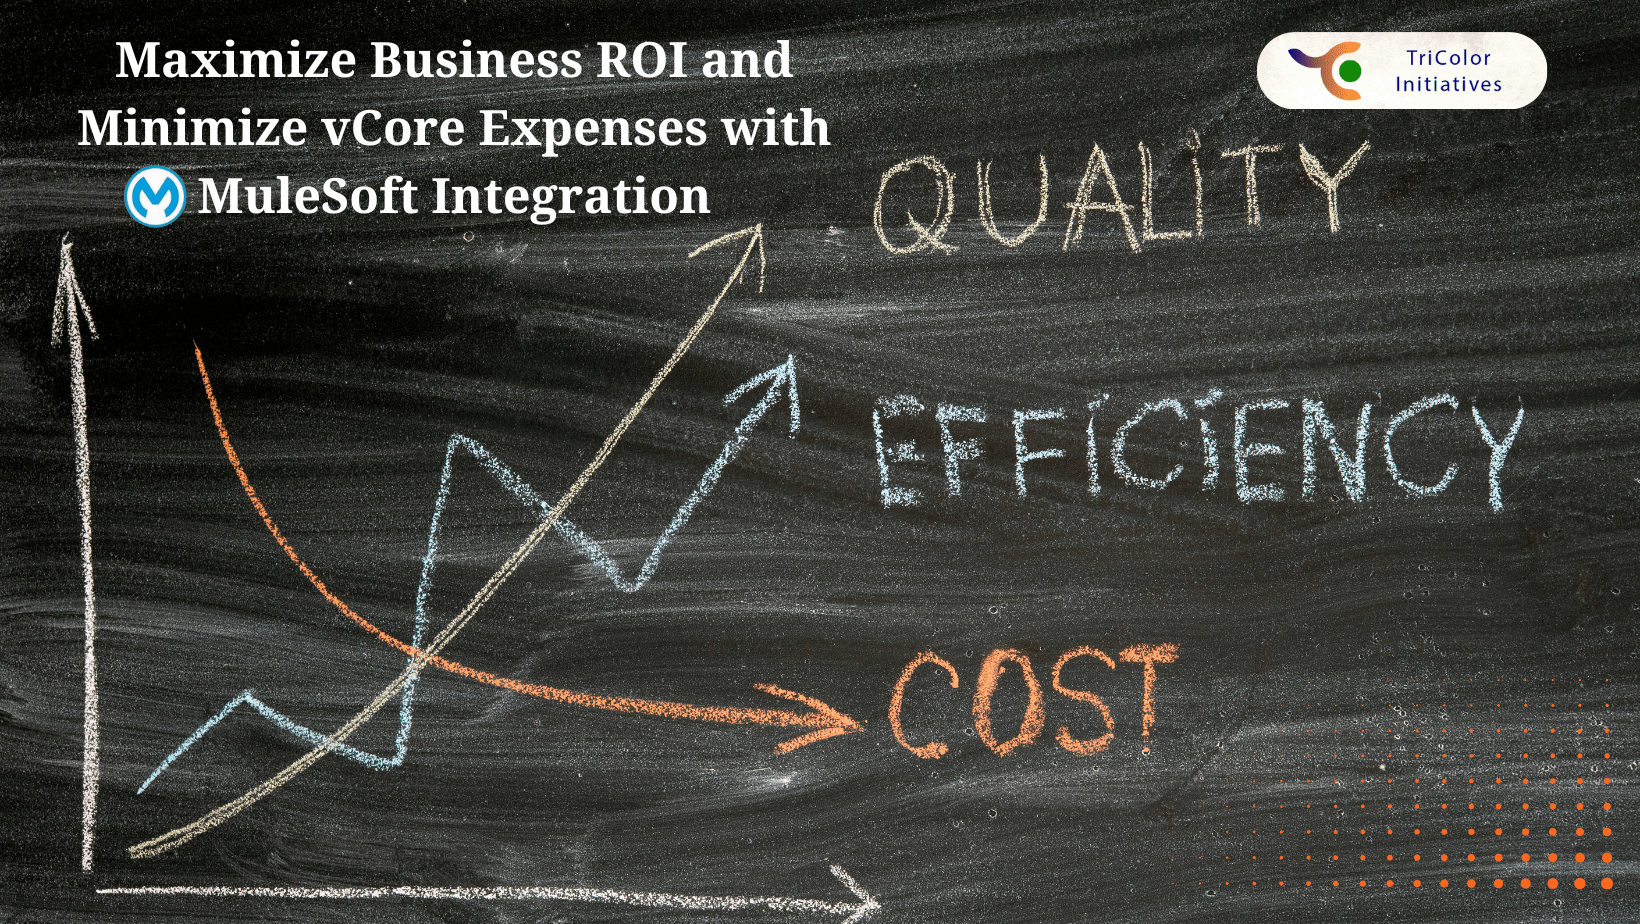 How to Maximize ROI and Minimize vCore Expenses with MuleSoft Integration?